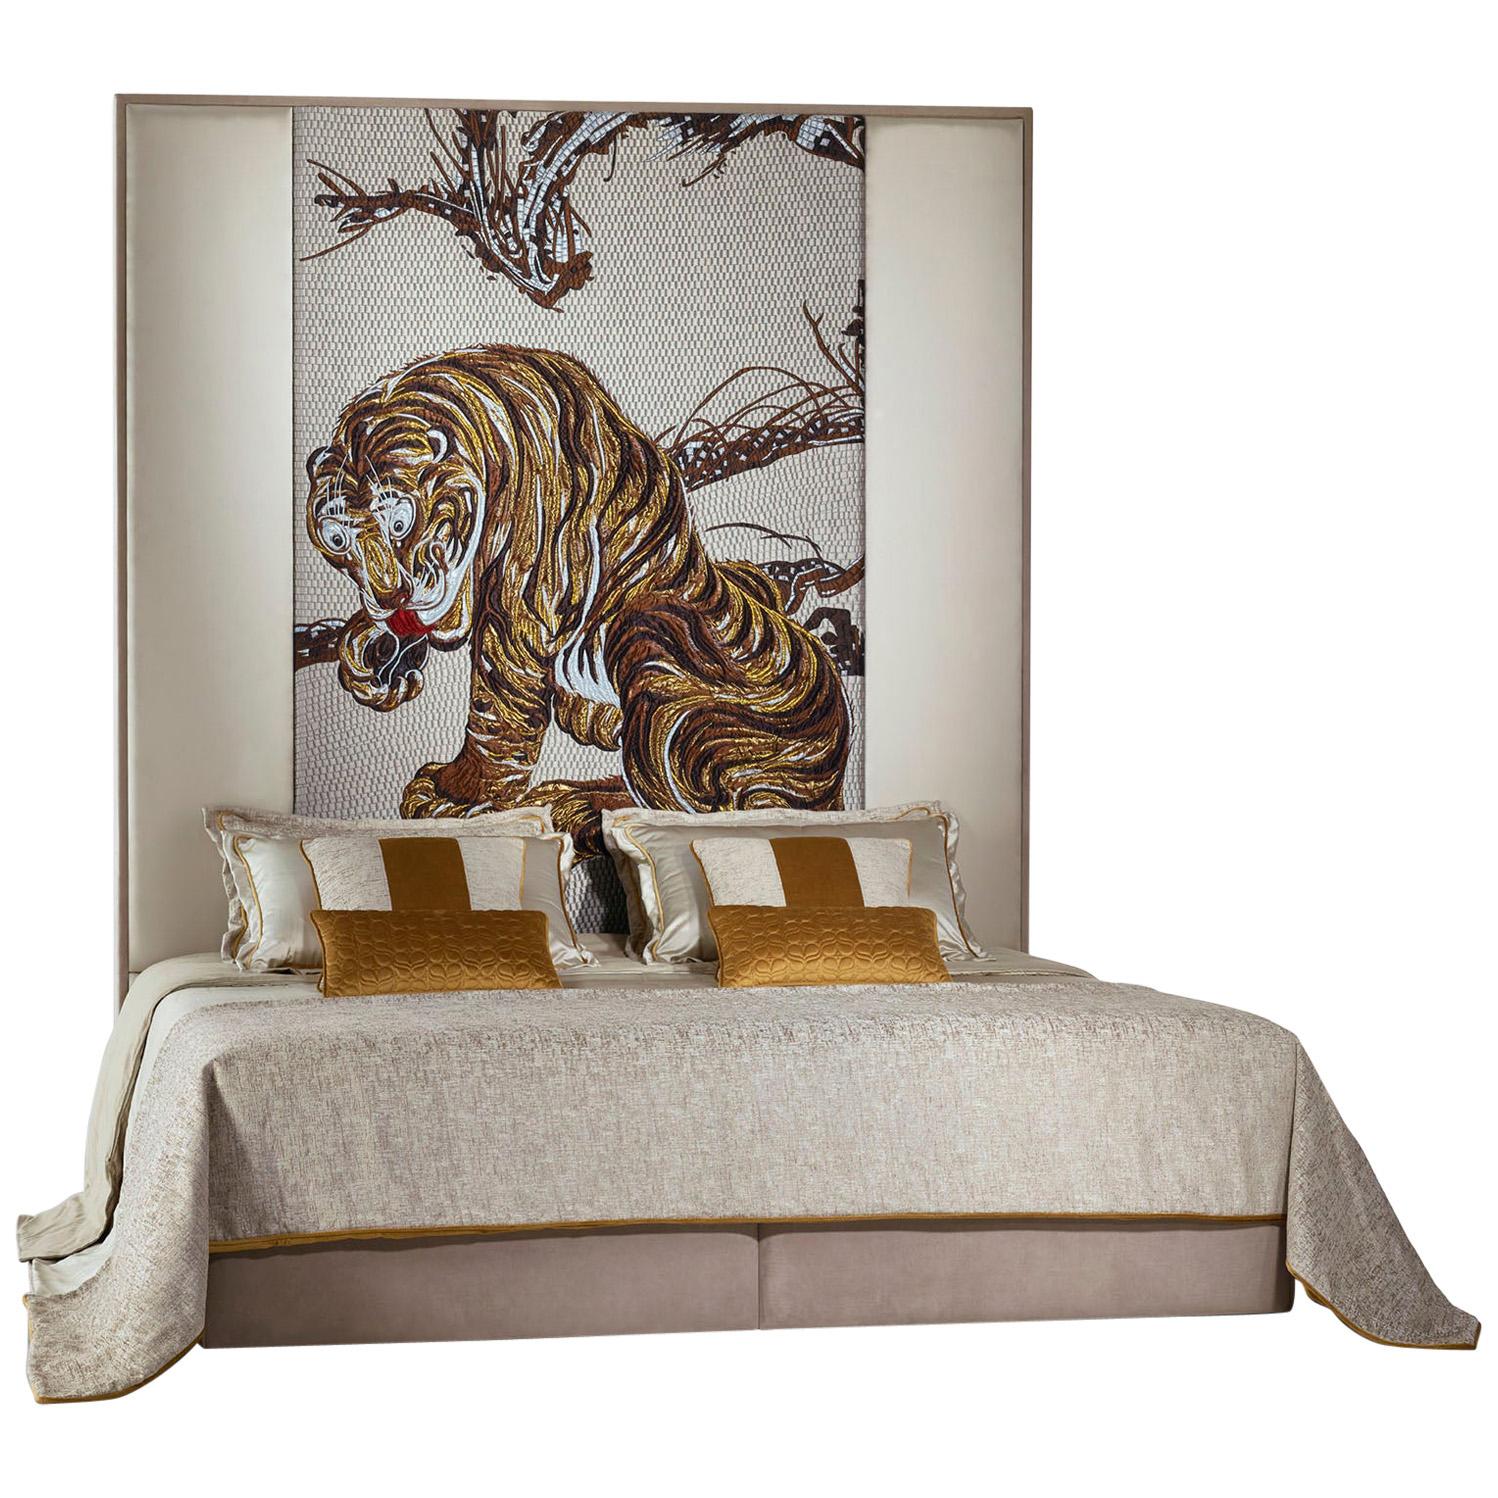 Stylish Bed Headboard Fabric or Leather Upholstery Tiger Tapestry Middle Panel For Sale